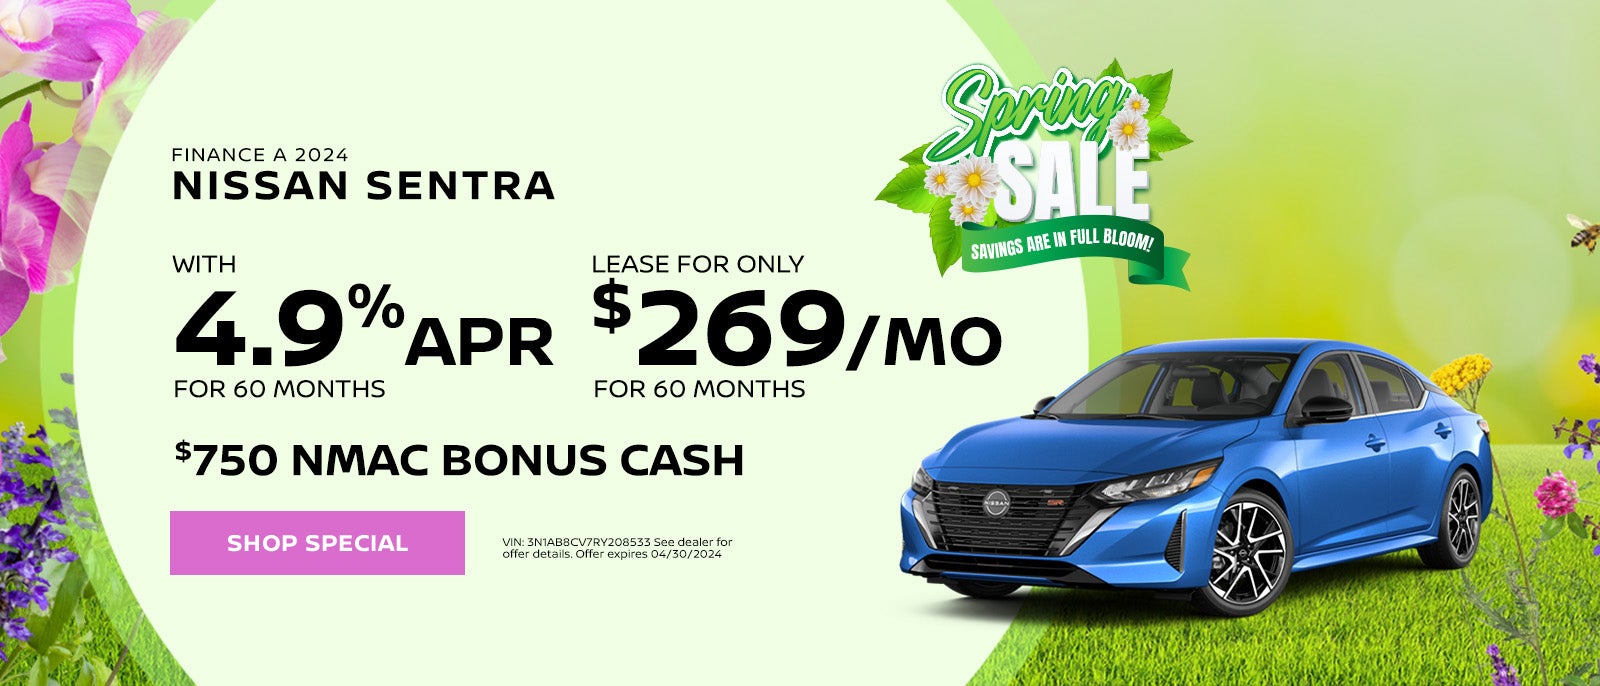 finance a 2024 nissan sentra with 4.9% Apr for 60 months 